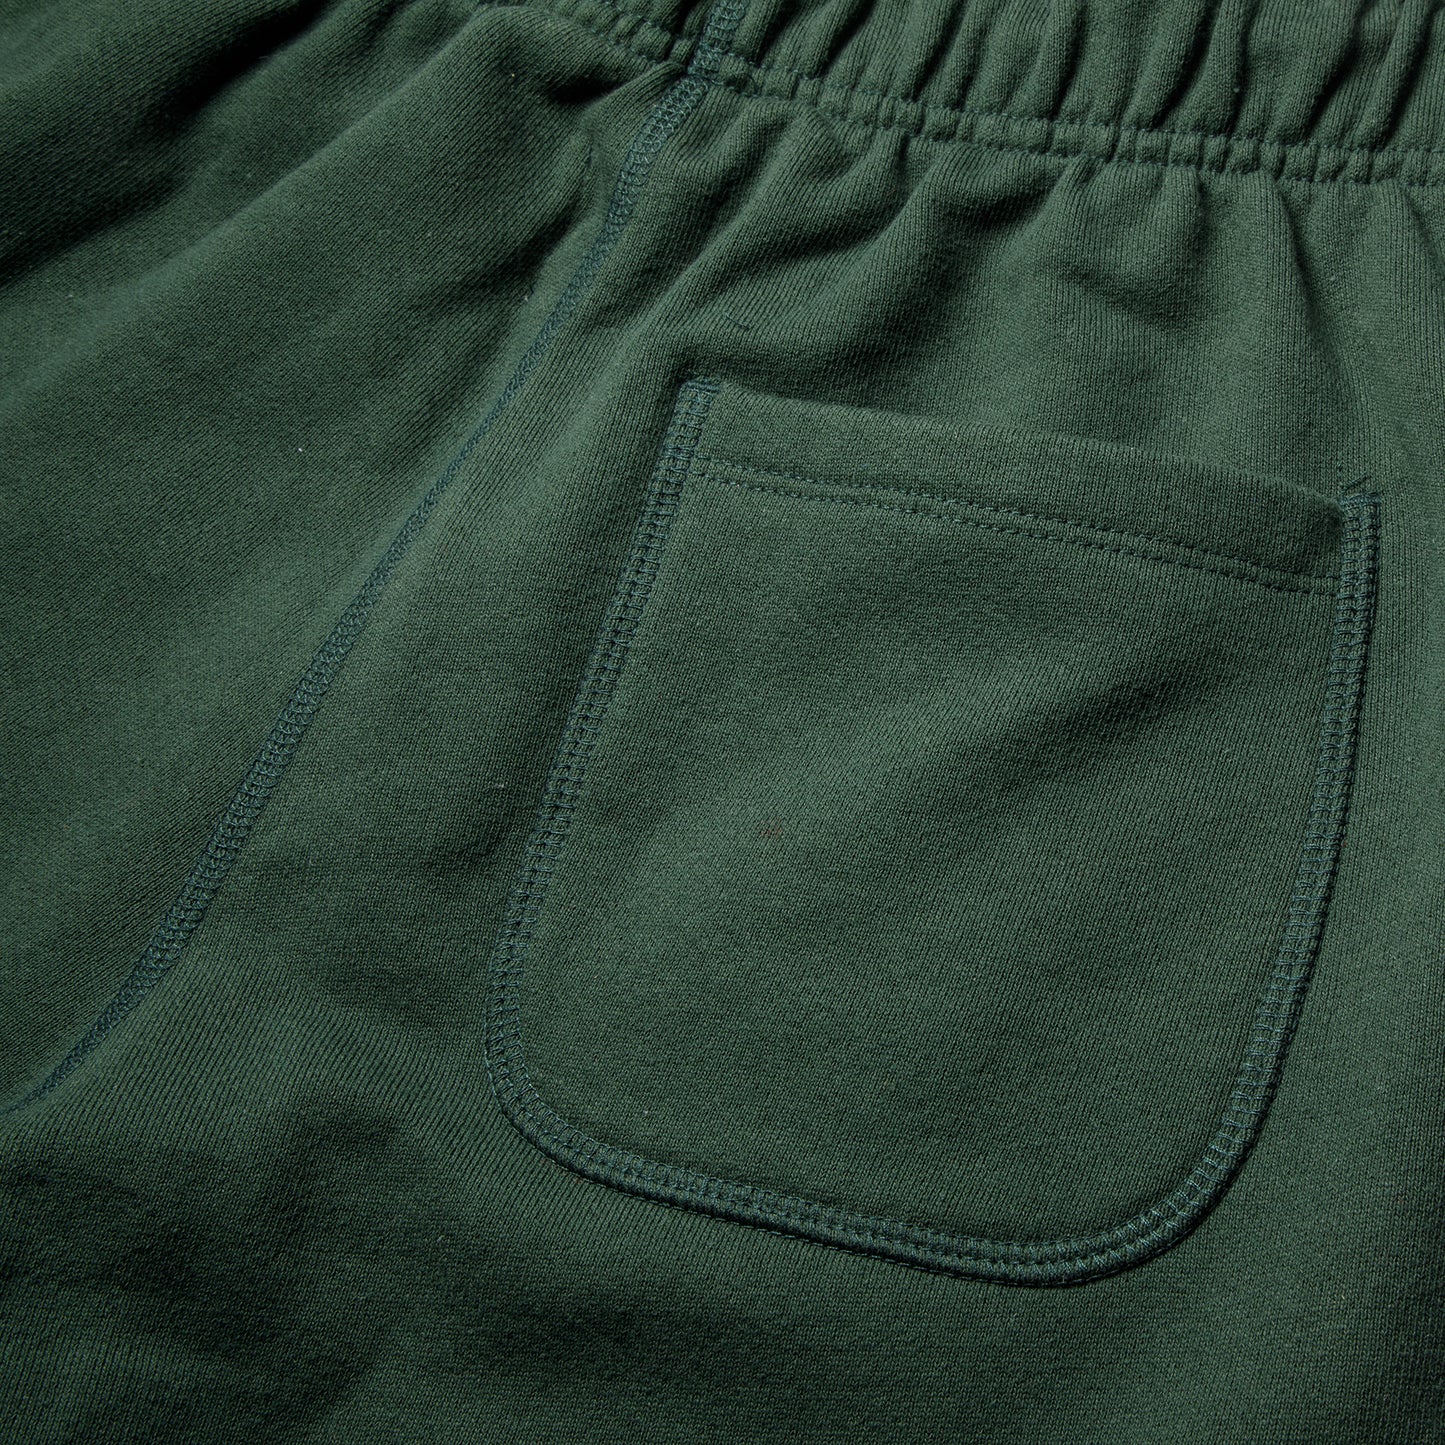 New Balance MADE in USA Core Sweatpant (MTN)